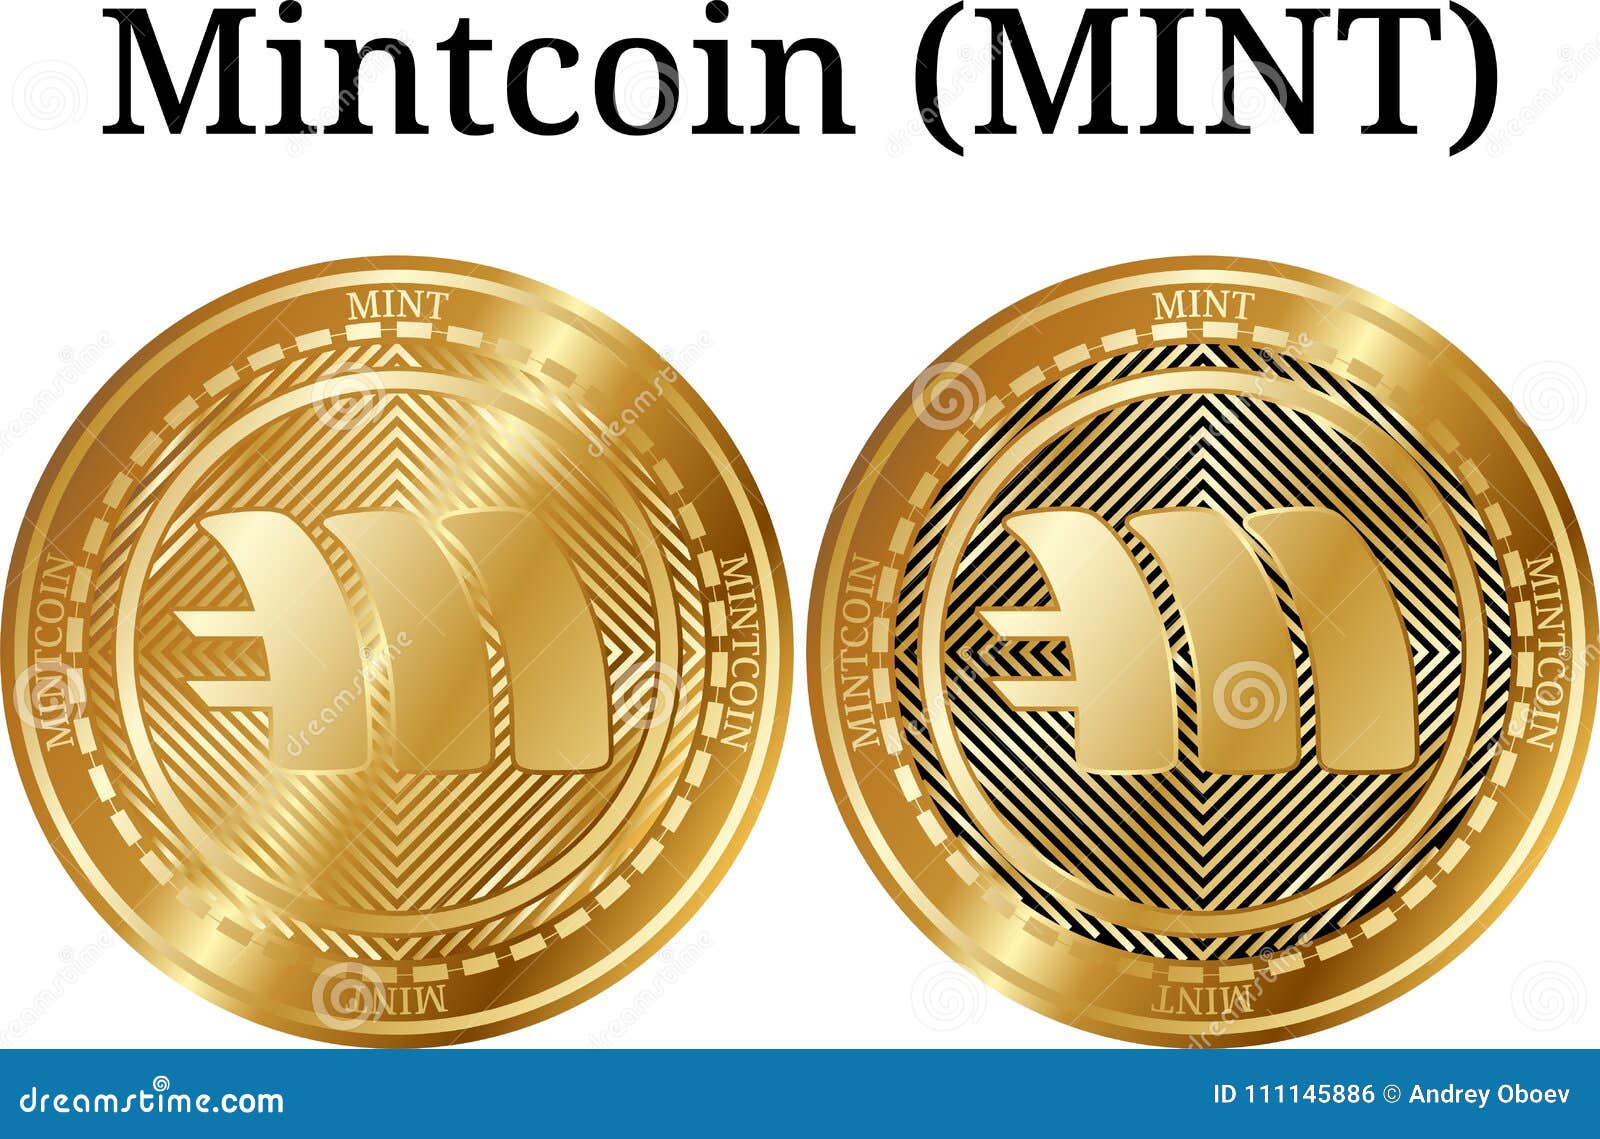 Mint coin crypto currency storm cryptocurrency prediction